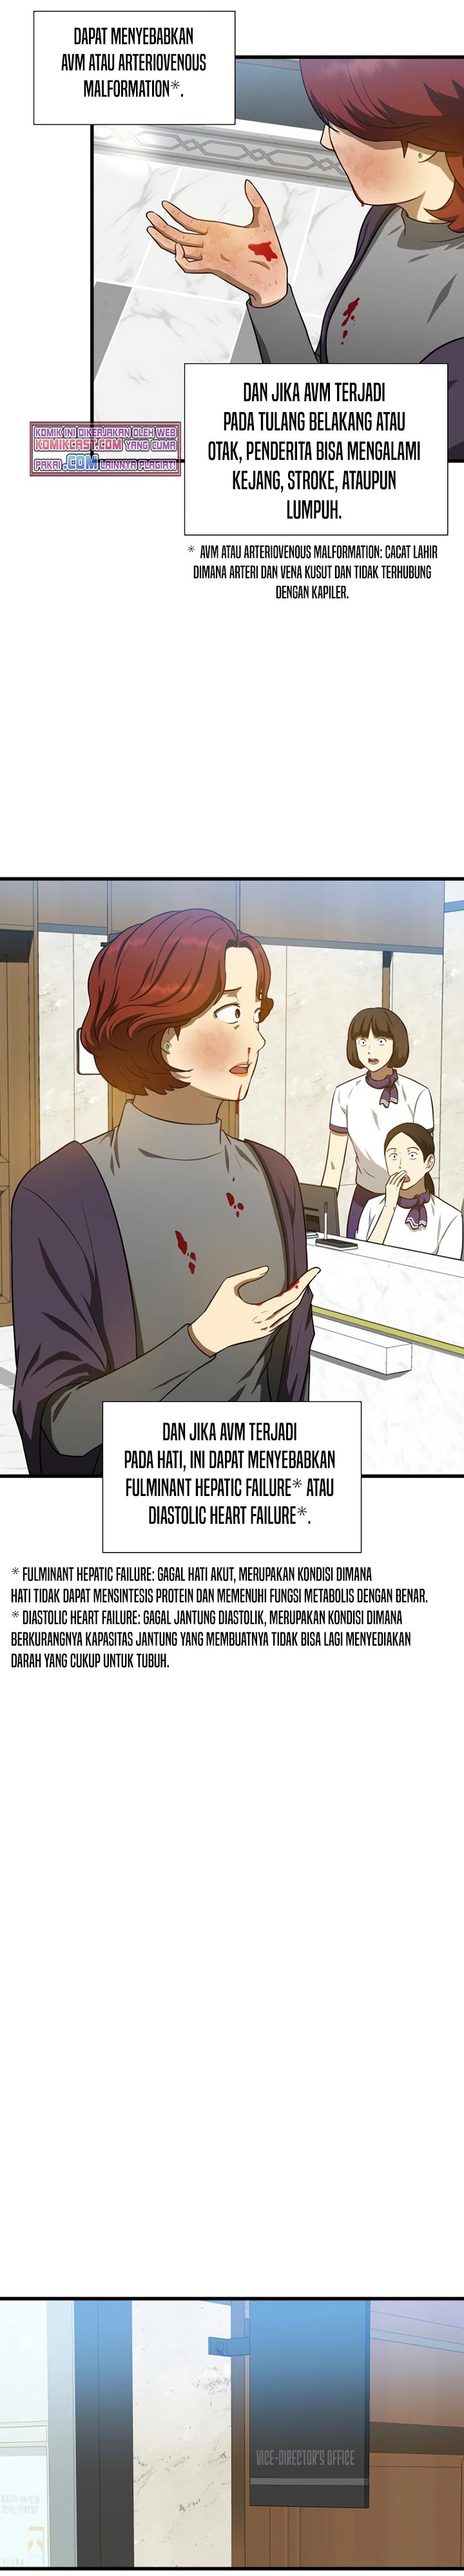 Perfect Surgeon Chapter 03 23